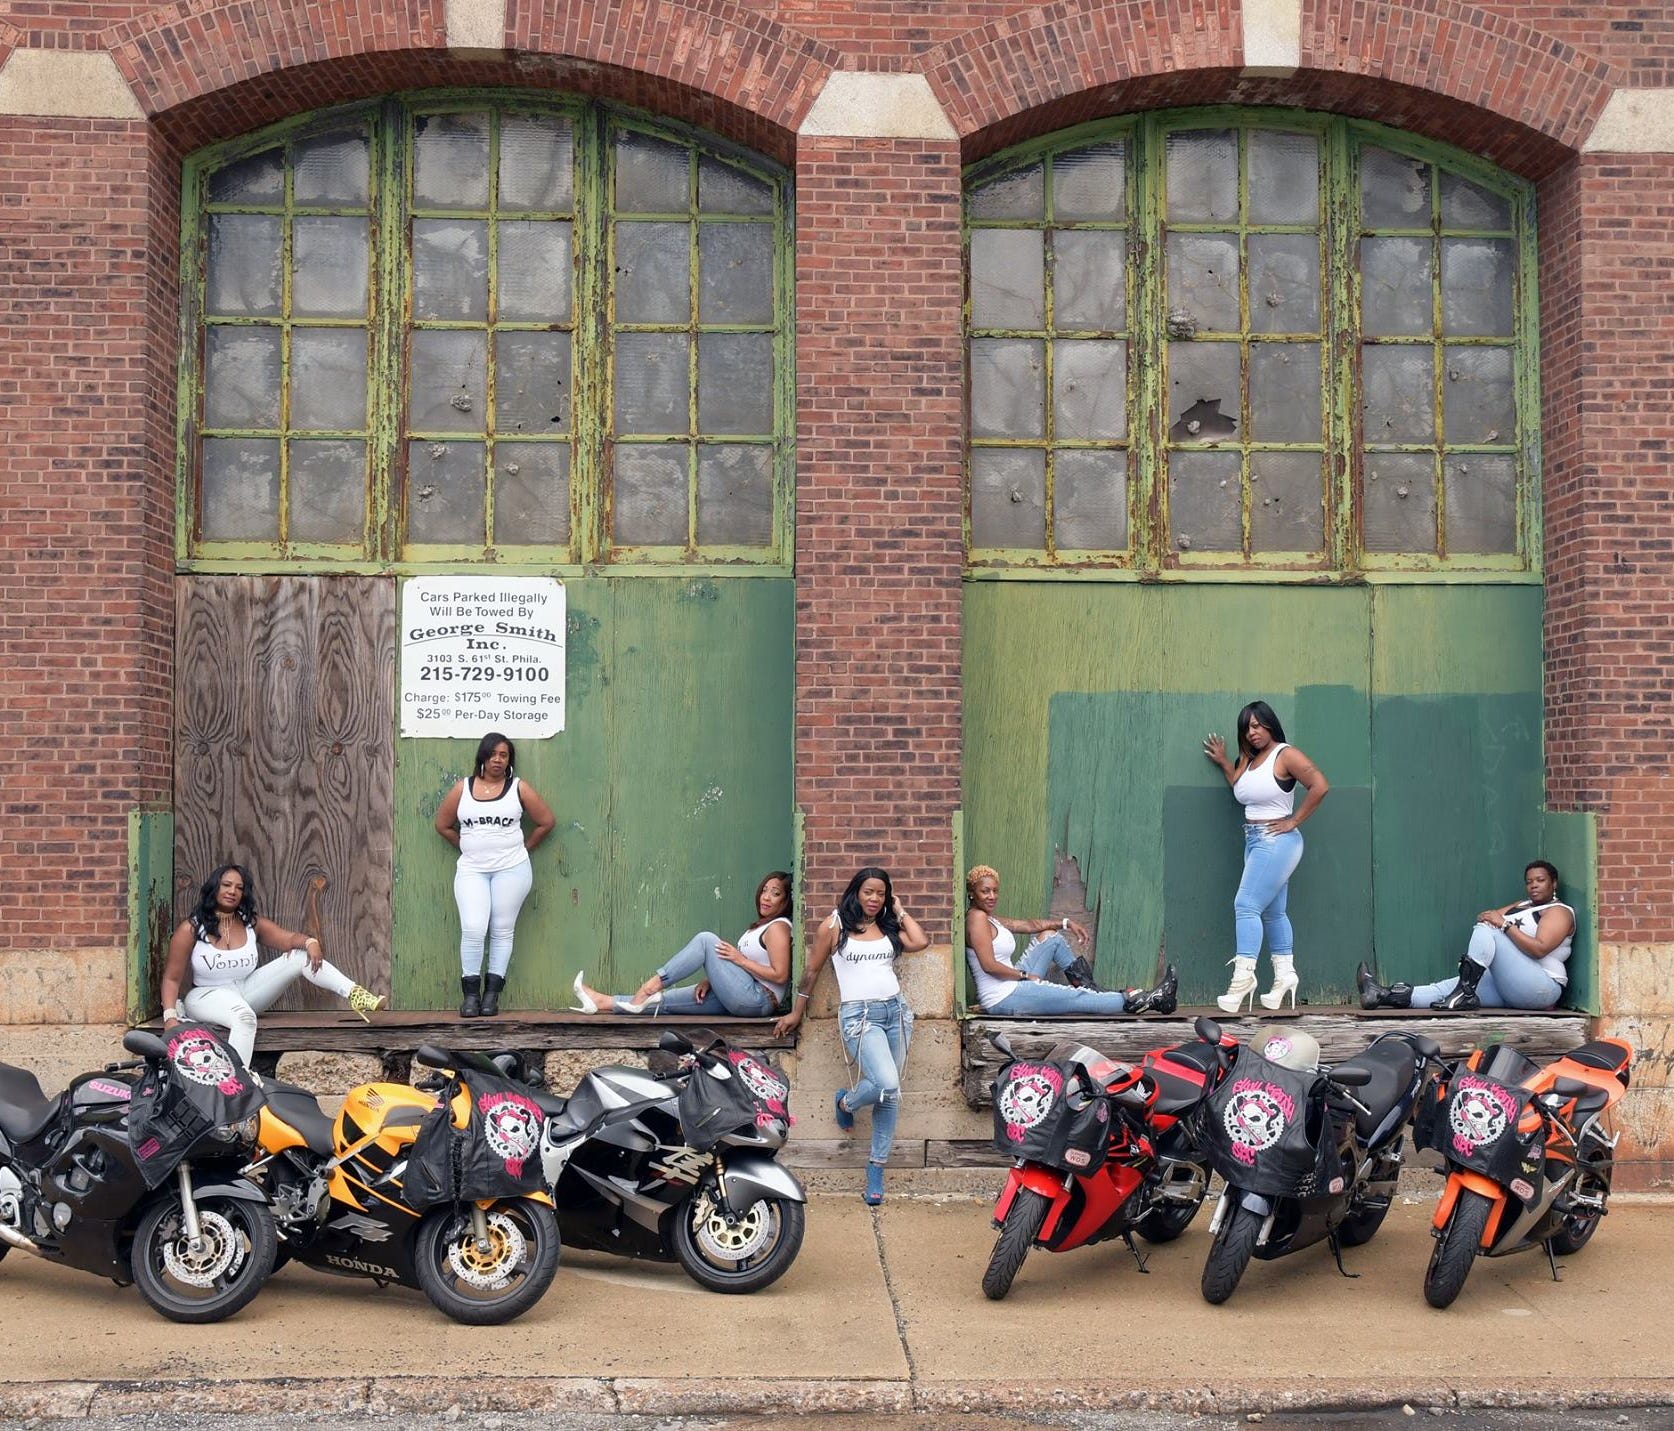 The Skull Kandy SBC Motorcycle Club in the south Jersey-Philadelphia area is just one of many female-only motorcycle riding groups across the country.